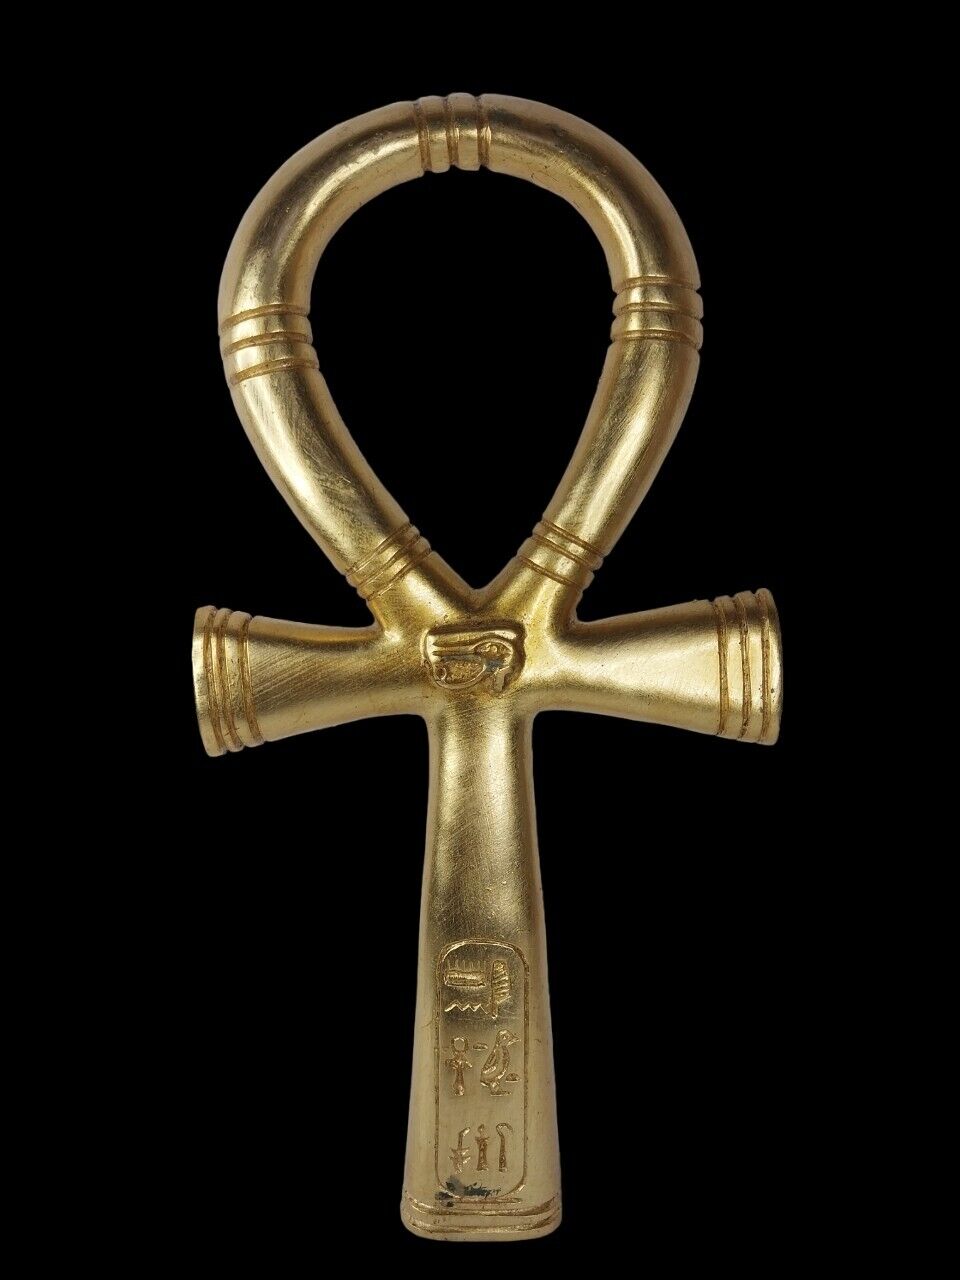 UNIQUE ANCIENT EGYPTIAN ANTIQUE Large of Ankh Key of Life Luck Hieroglyphic